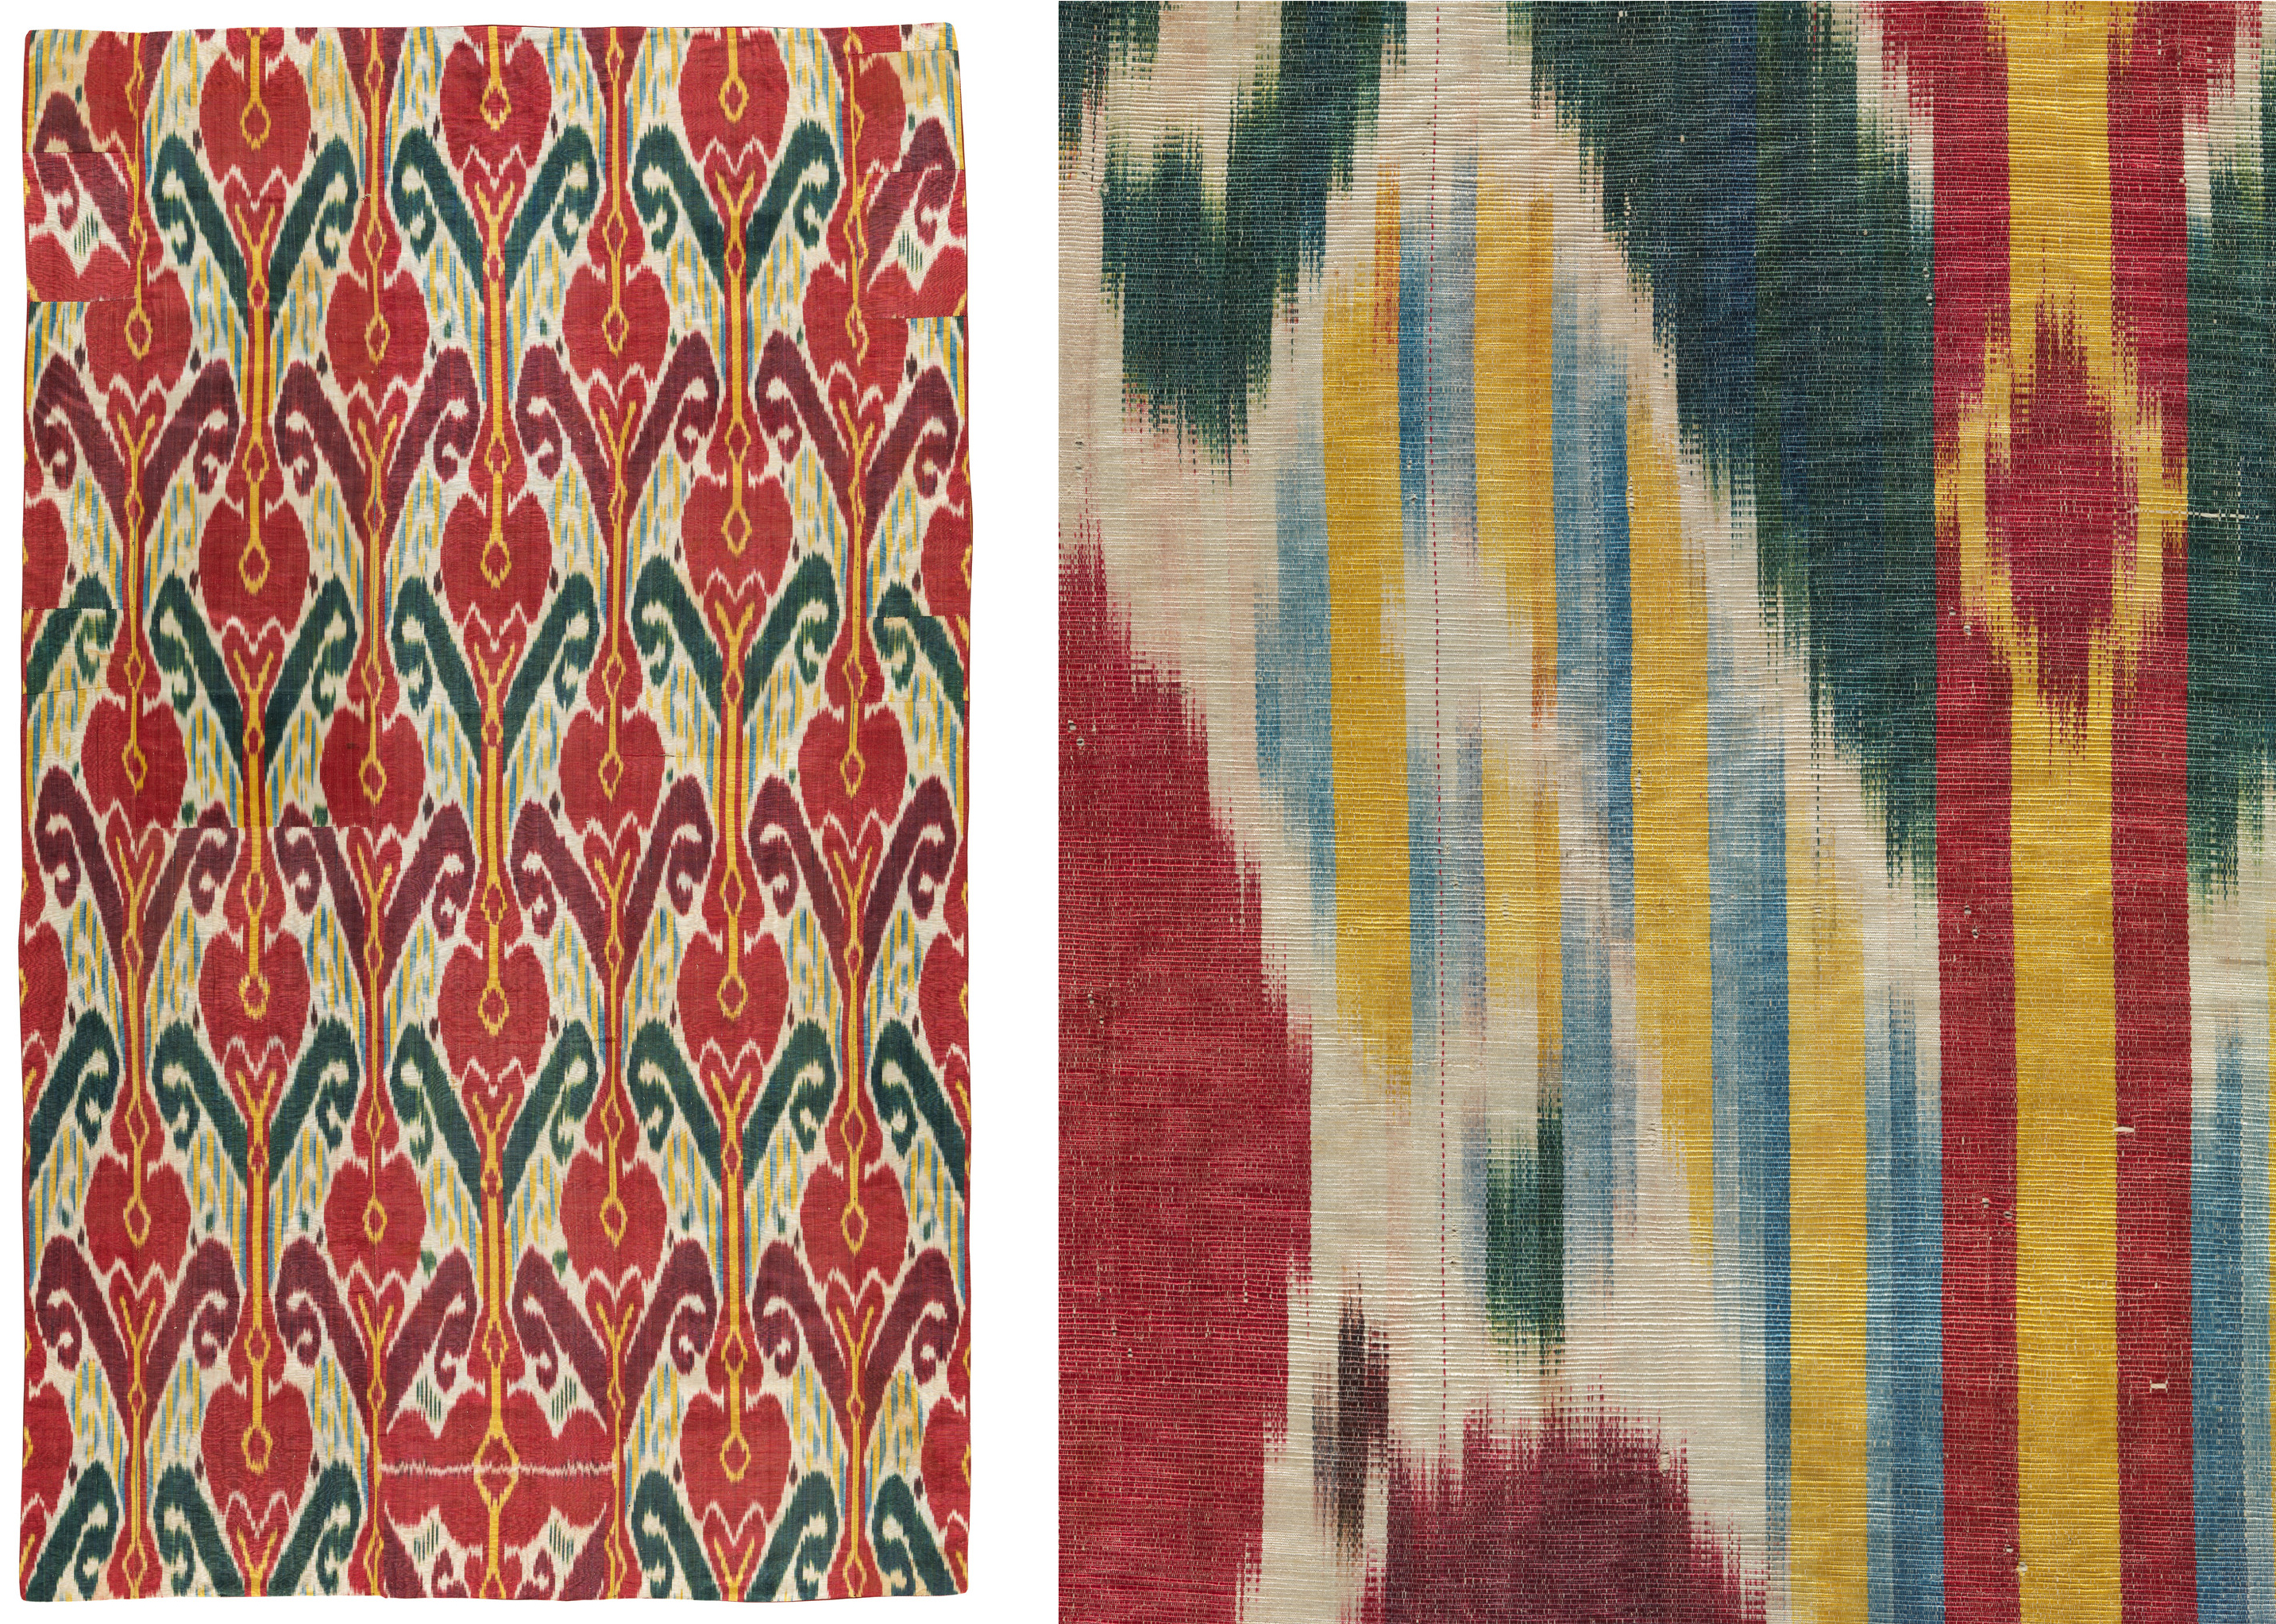 Wall Hanging (Pardah) (left: overall; right: detail), Uzbekistan, Bukhara, second half of the 19th century, Los Angeles County Museum of Art, gift of Dr. David and Elizabeth Reisbord, photos © Museum Associates/LACMA